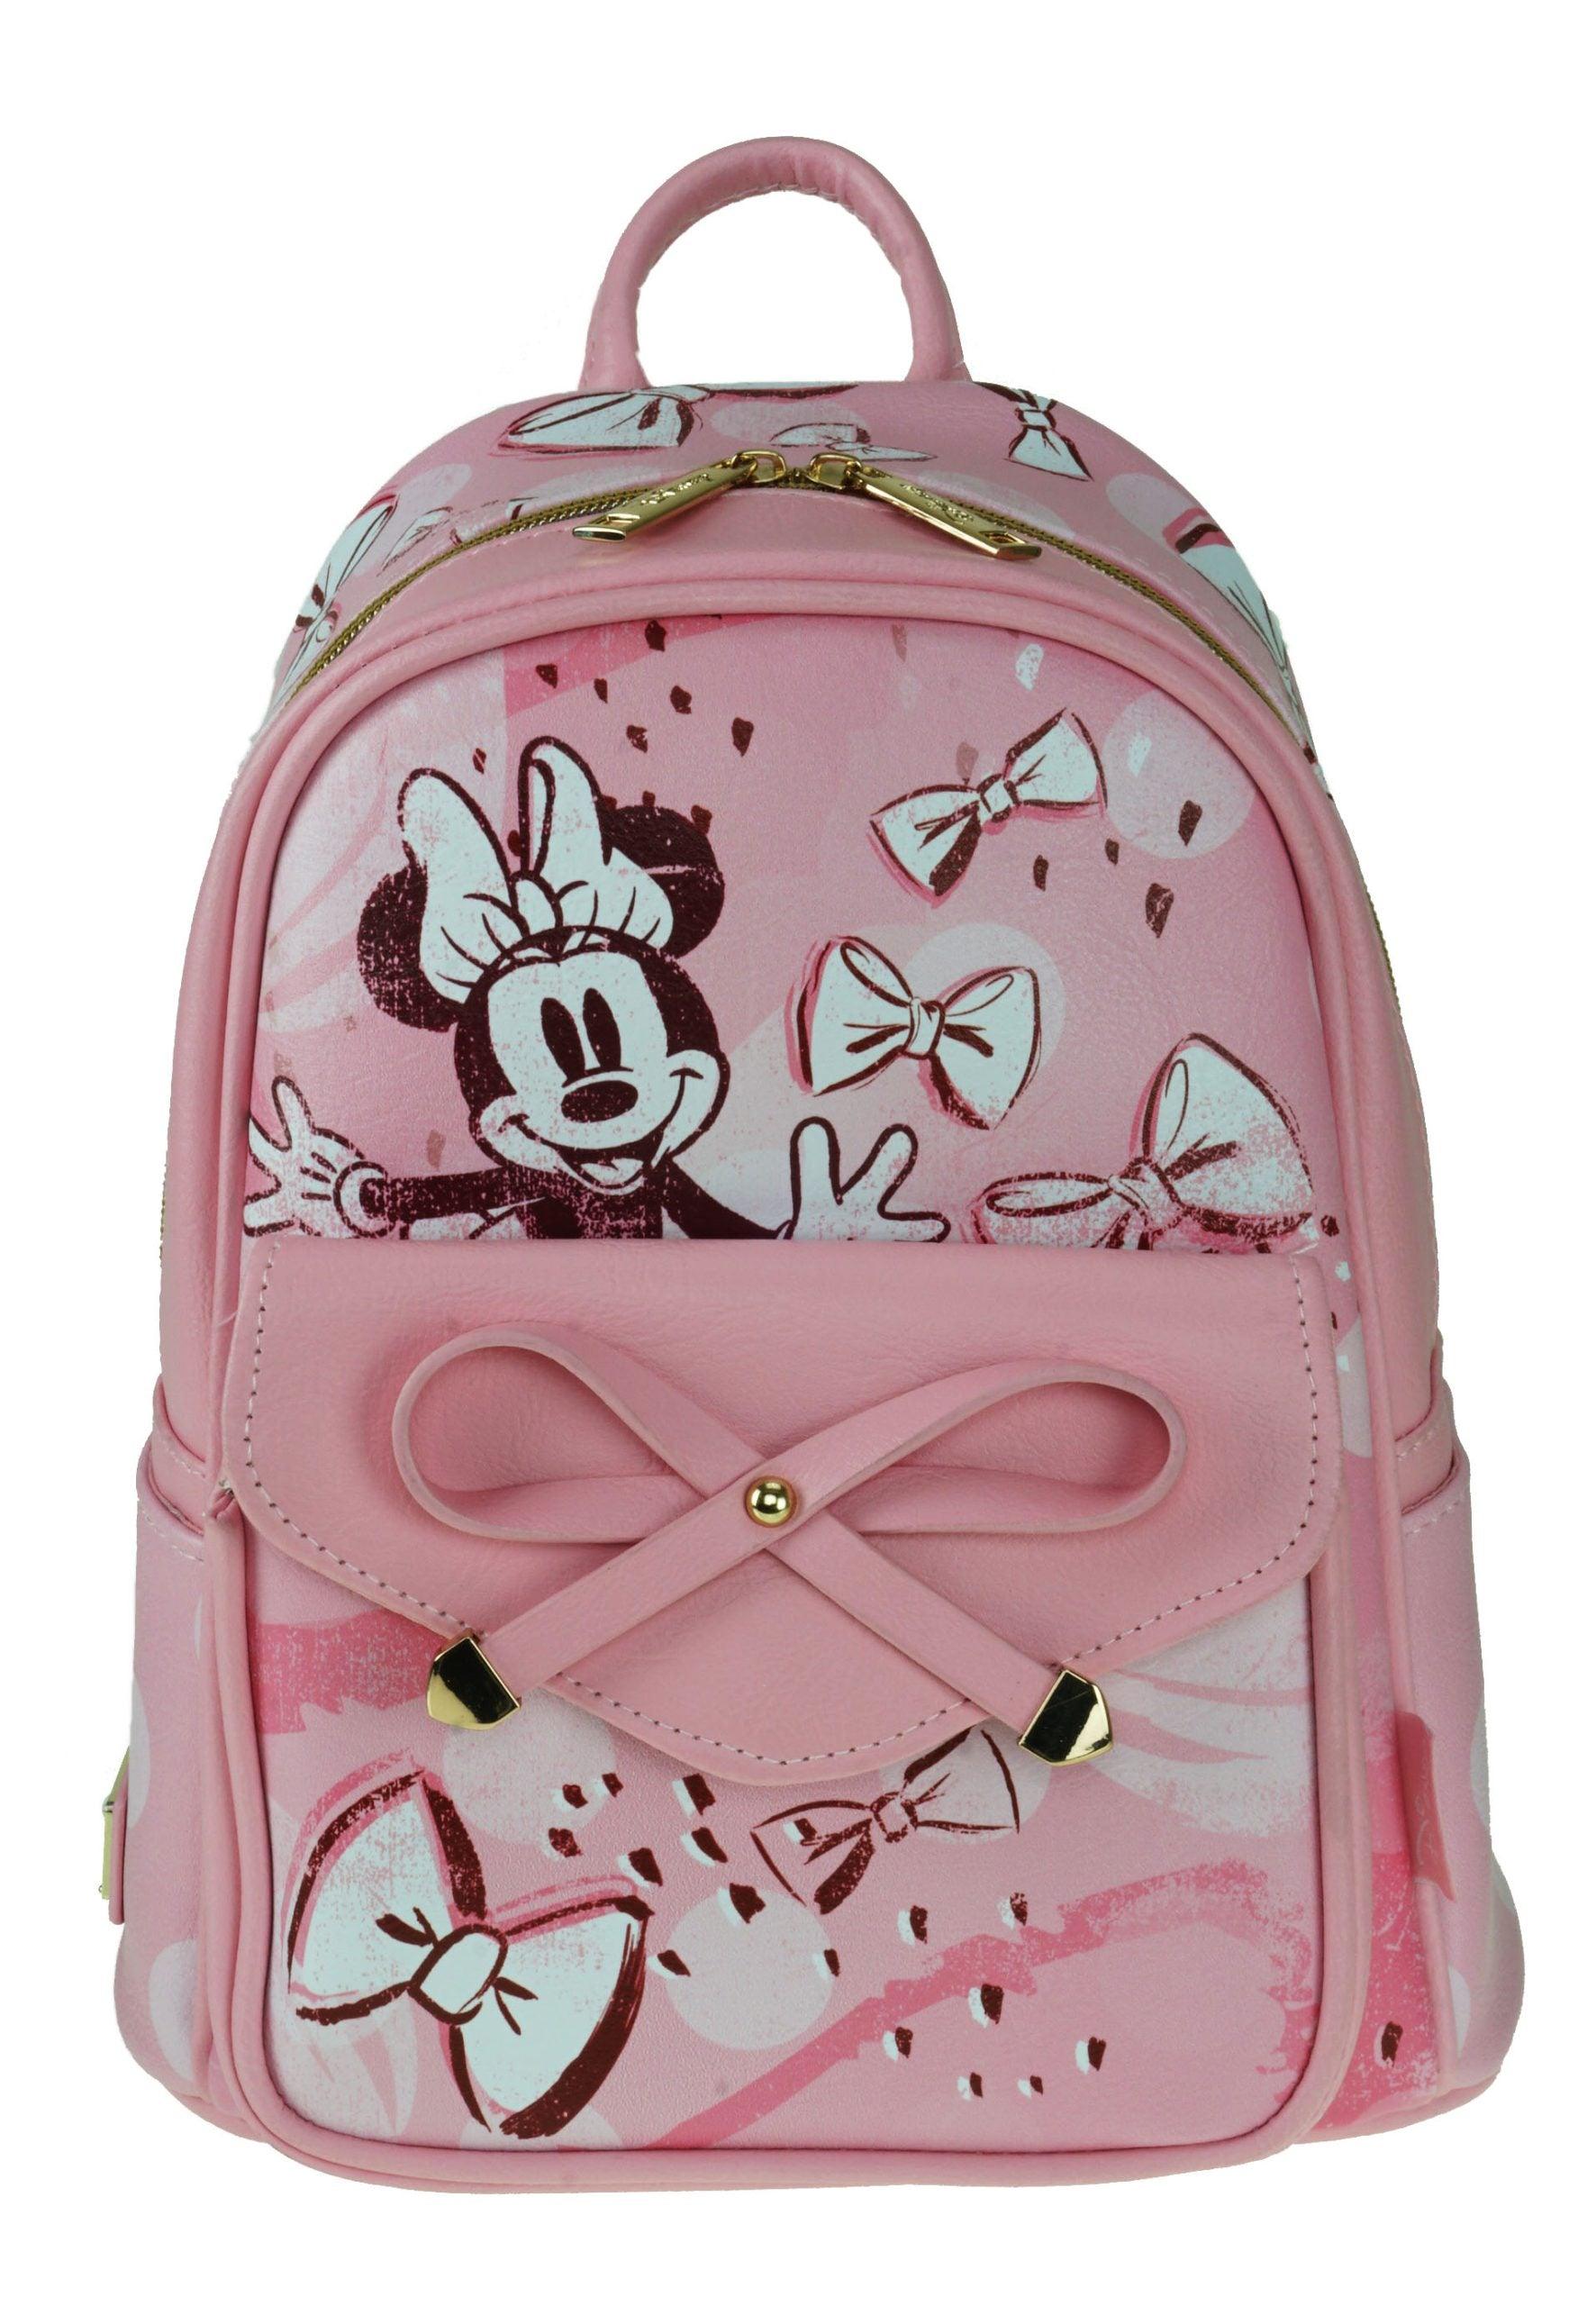 Minnie Mouse Faux Leather Mini Backpack